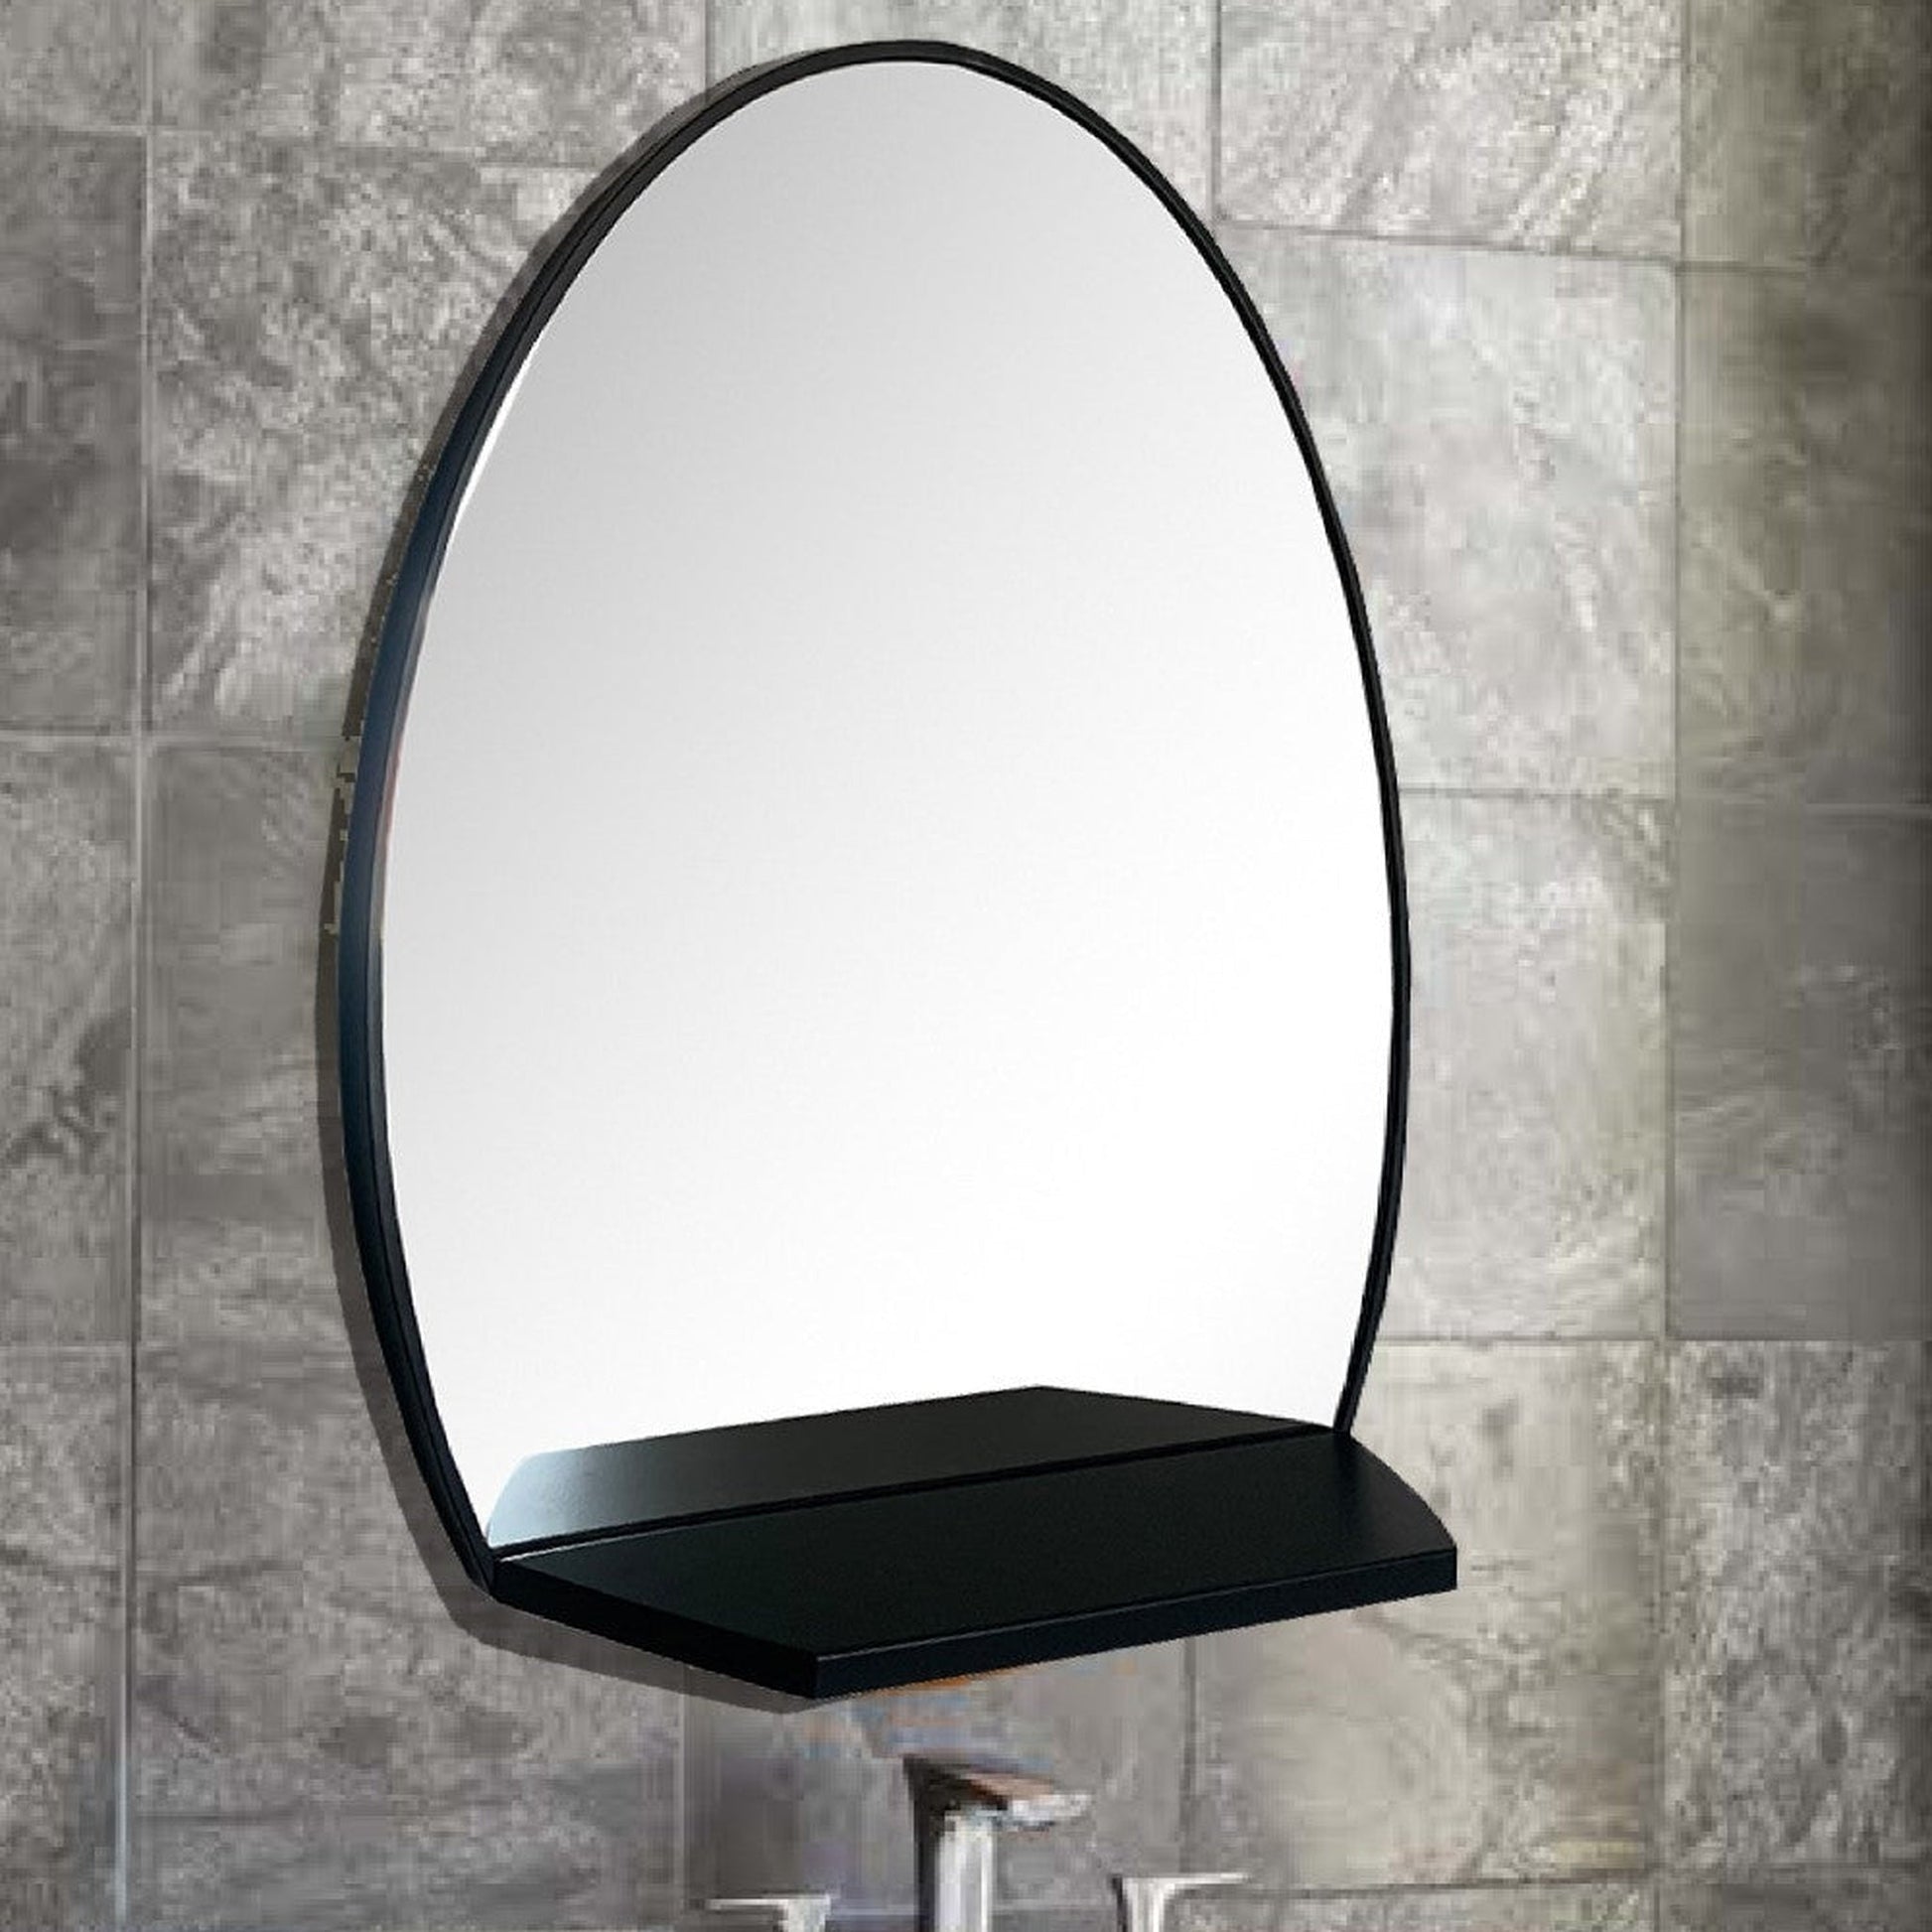 Bellaterra Home 24" x 28" Black Oval Wall-Mounted Steel Framed Mirror With Shelf